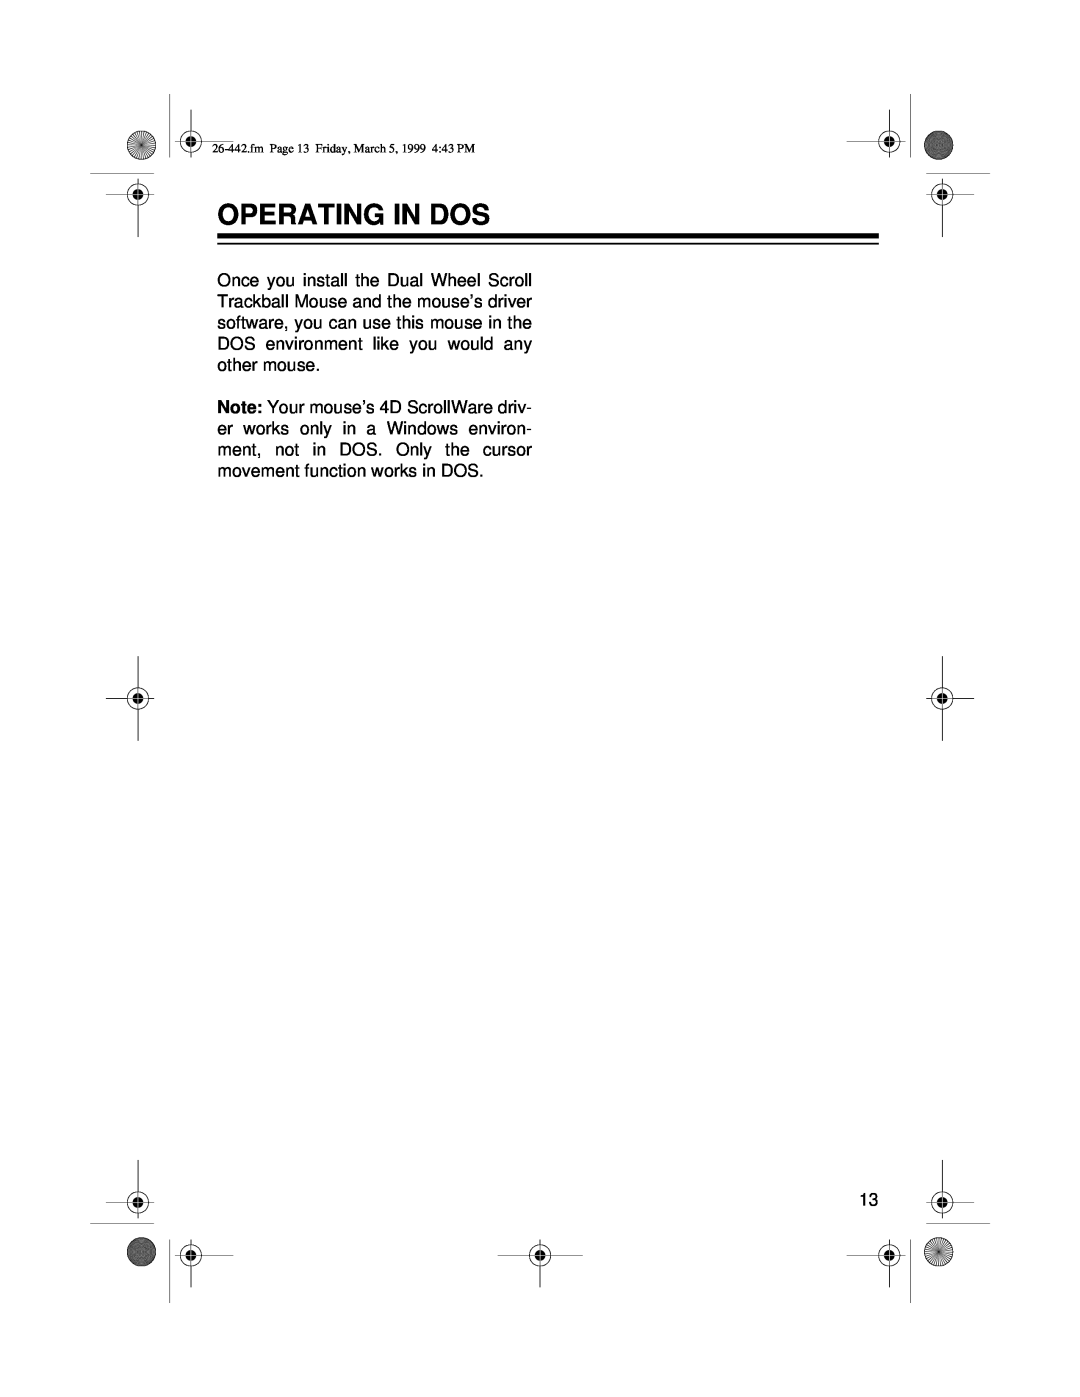 Radio Shack 26-442 owner manual Operating In Dos, fm Page 13 Friday, March 5, 1999 443 PM 